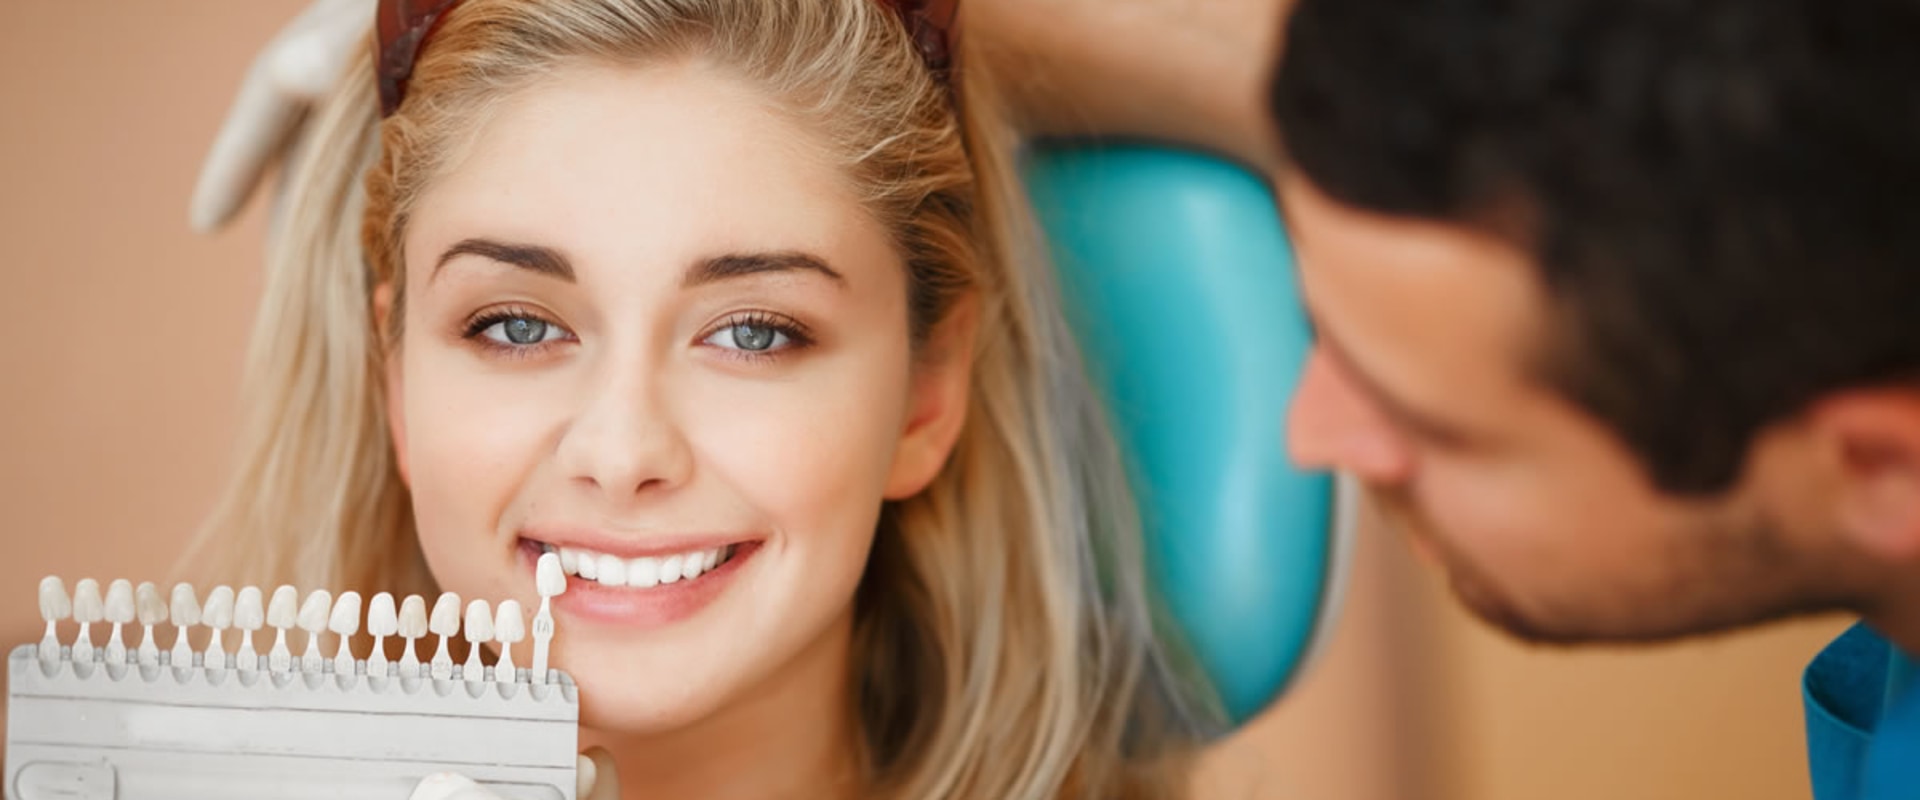 Whitening Toothpastes: What You Need to Know